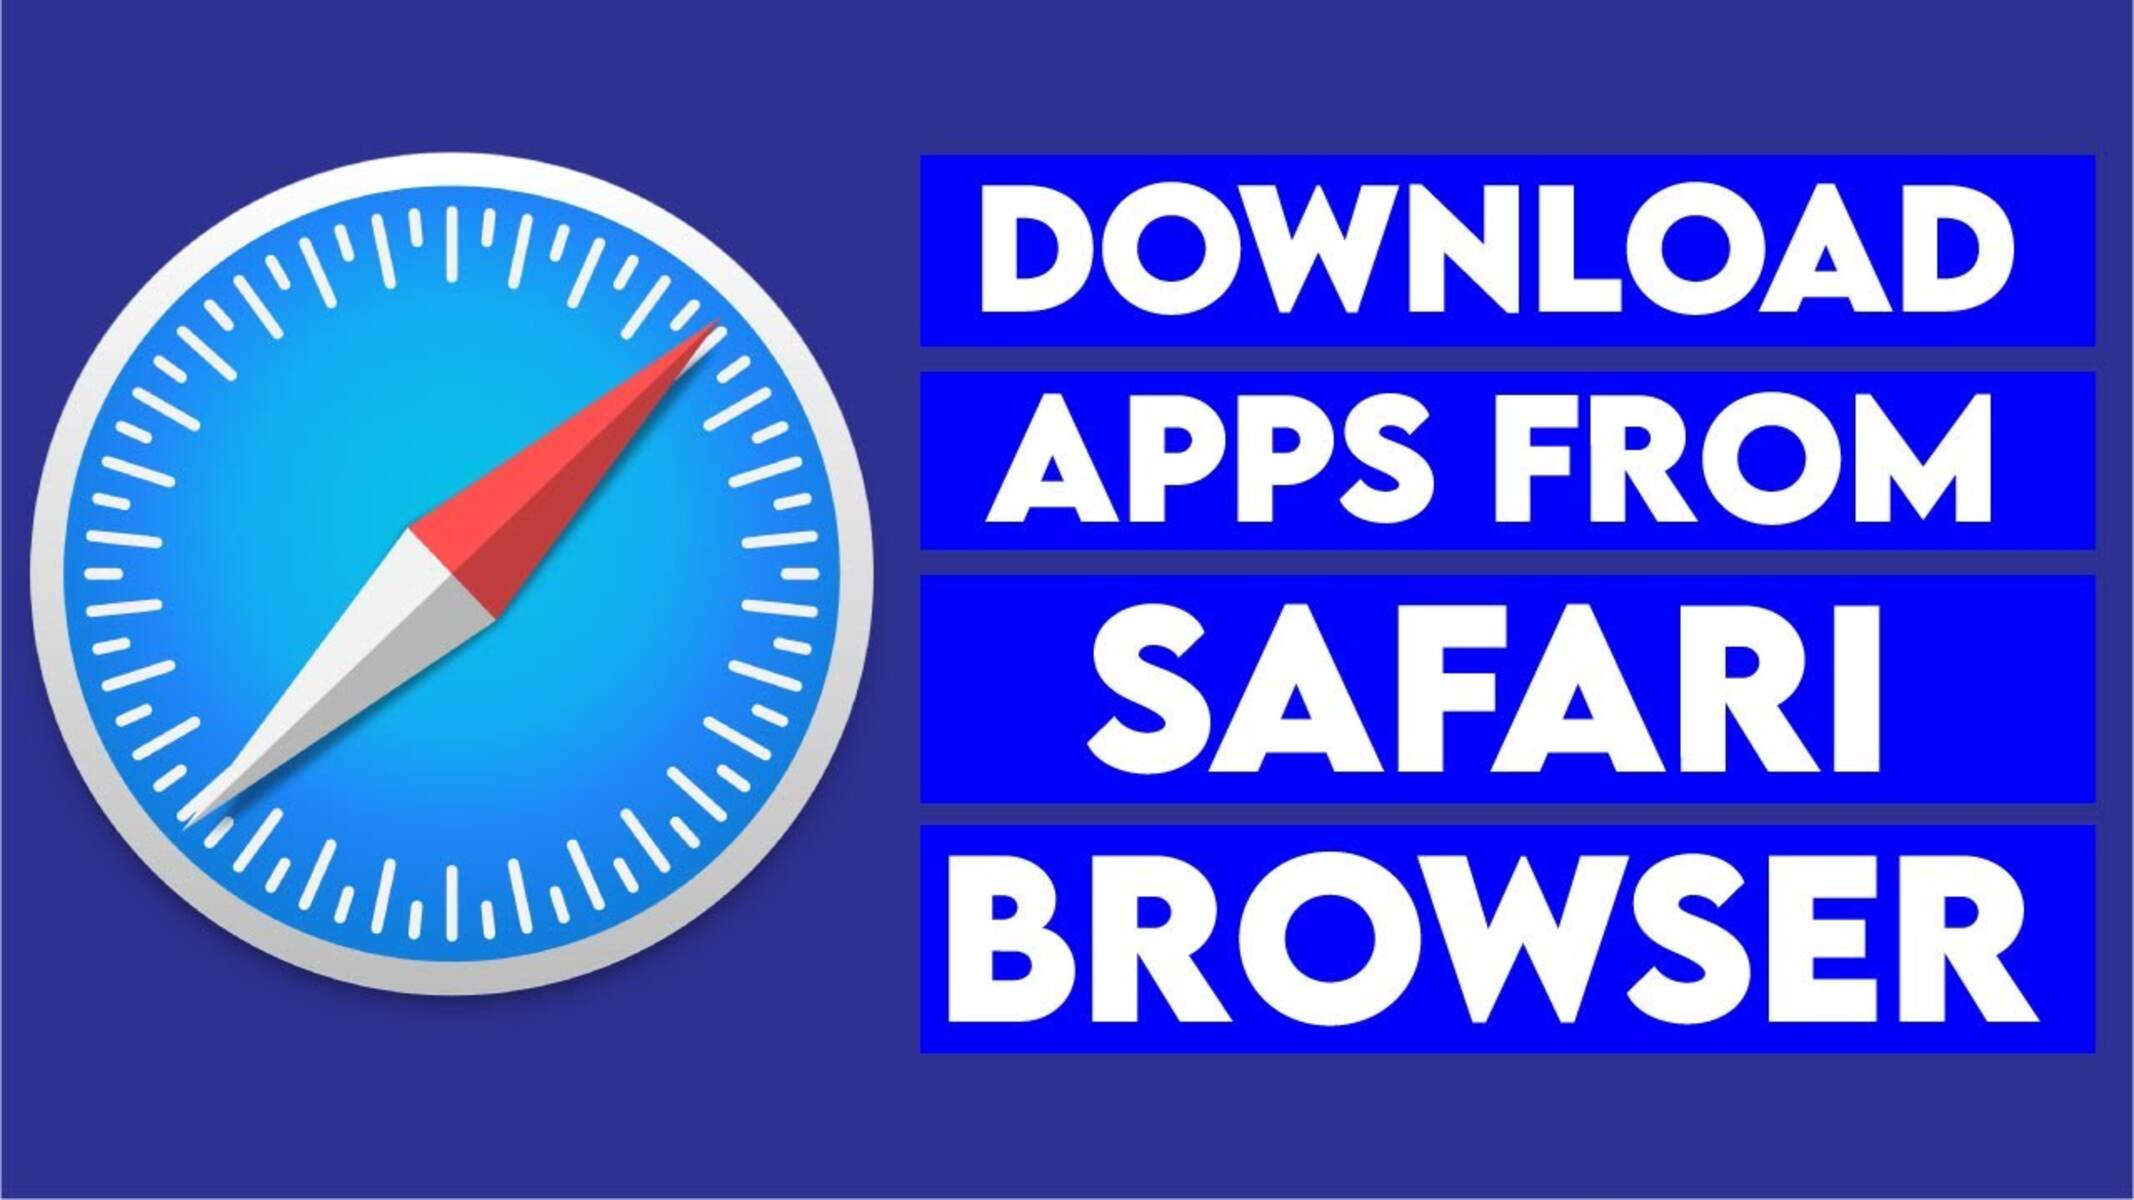 How To Get Free Apps On Safari